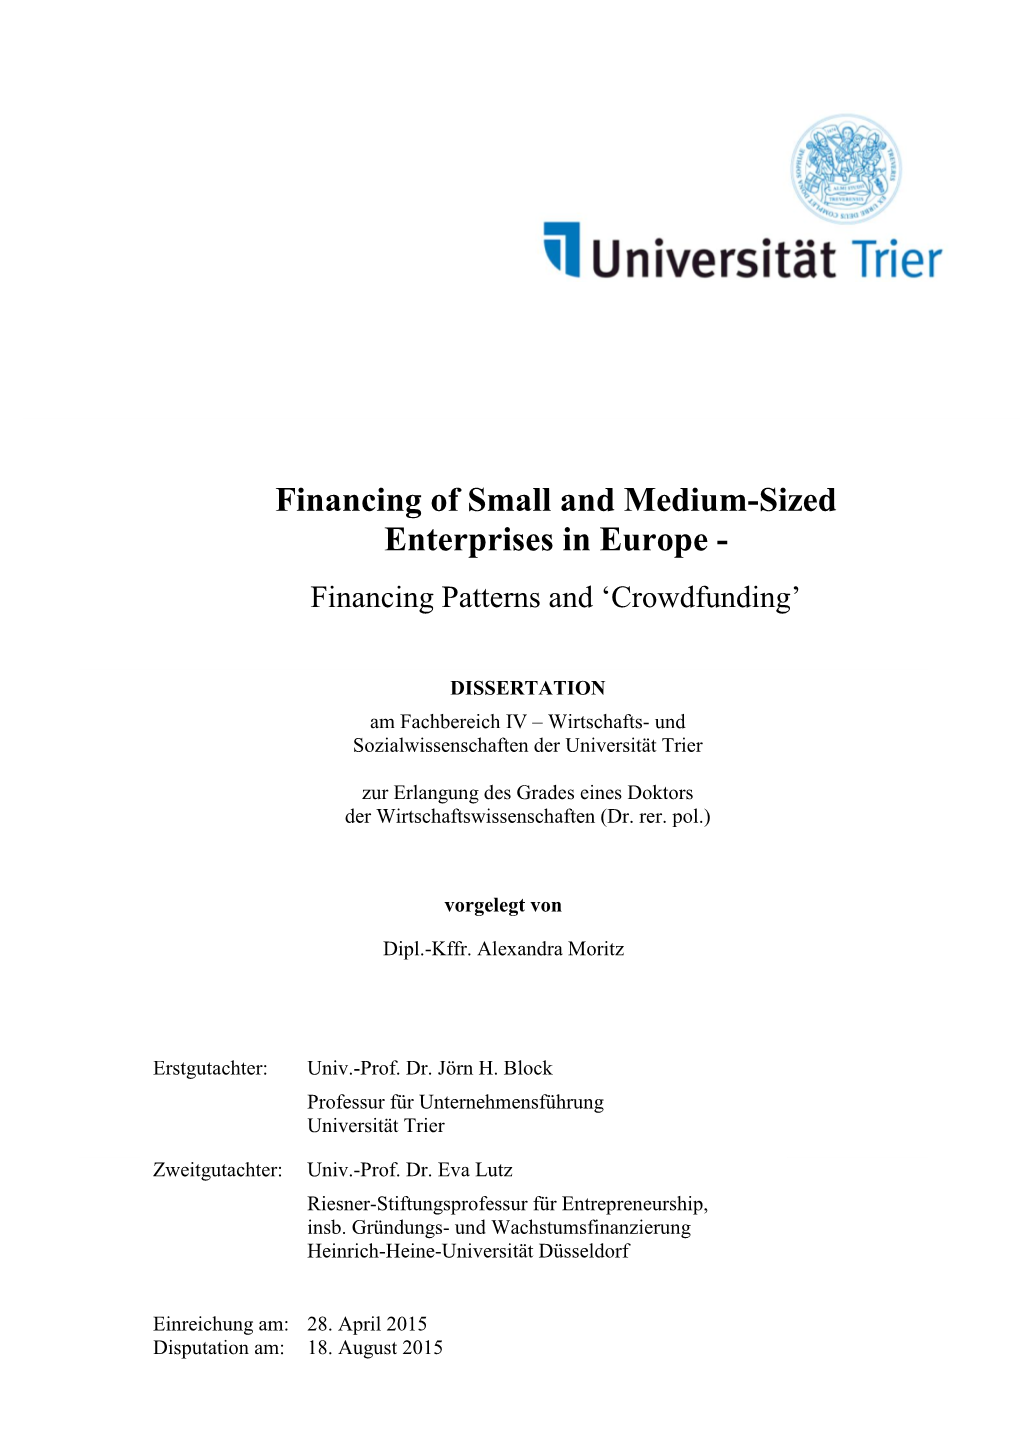 Financing of Small and Medium-Sized Enterprises in Europe - Financing Patterns and ‘Crowdfunding’